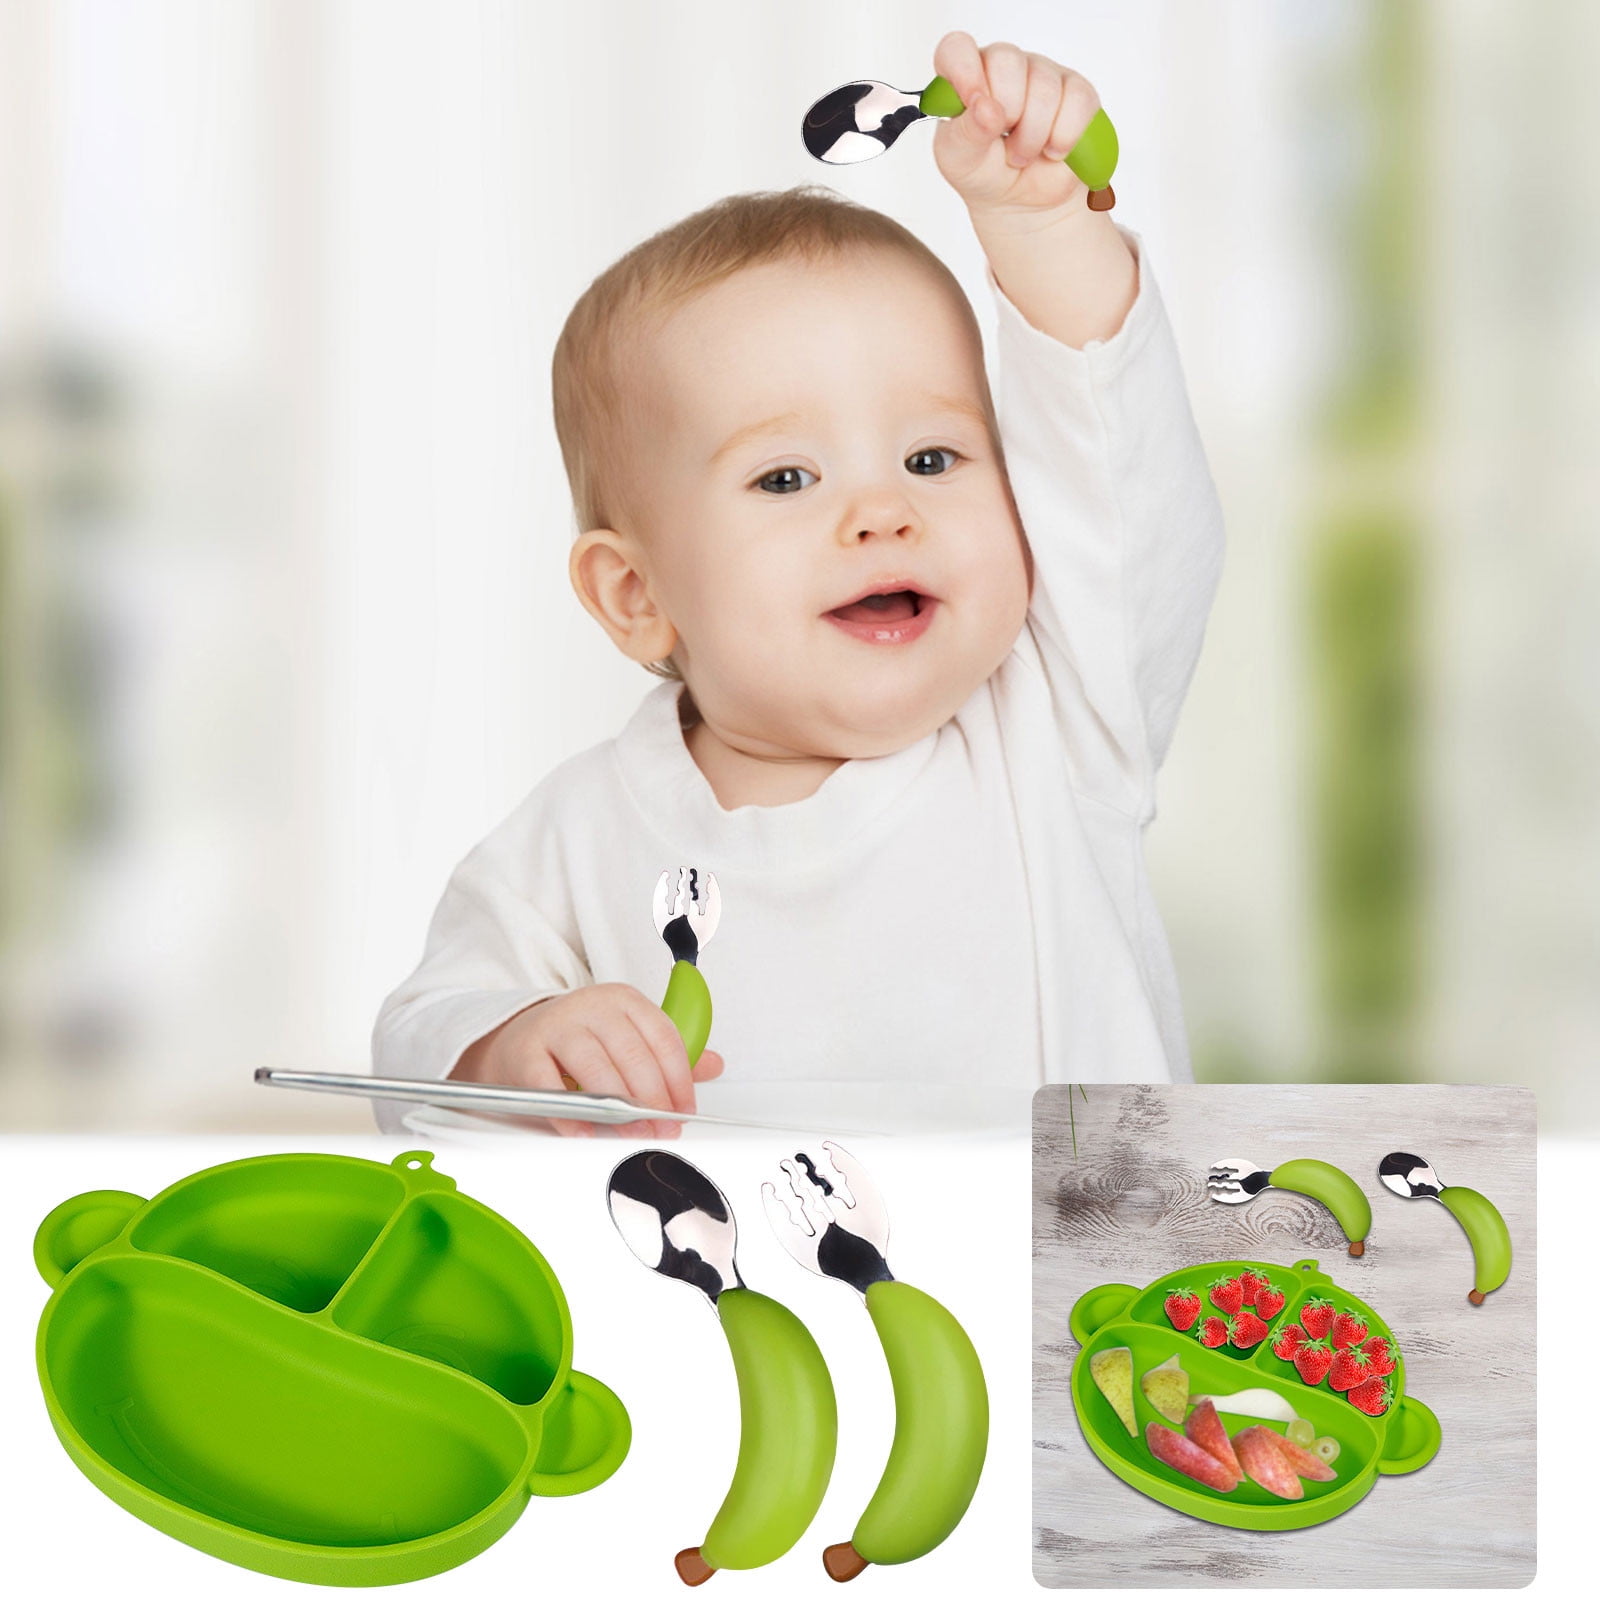  WeeSprout Suction Plates with Lids for Babies & Toddlers - 100%  Silicone, Dinnerware Stays Put, Divided Design for Picky Eaters, Microwave  & Dishwasher Friendly, 3 Pack : Baby